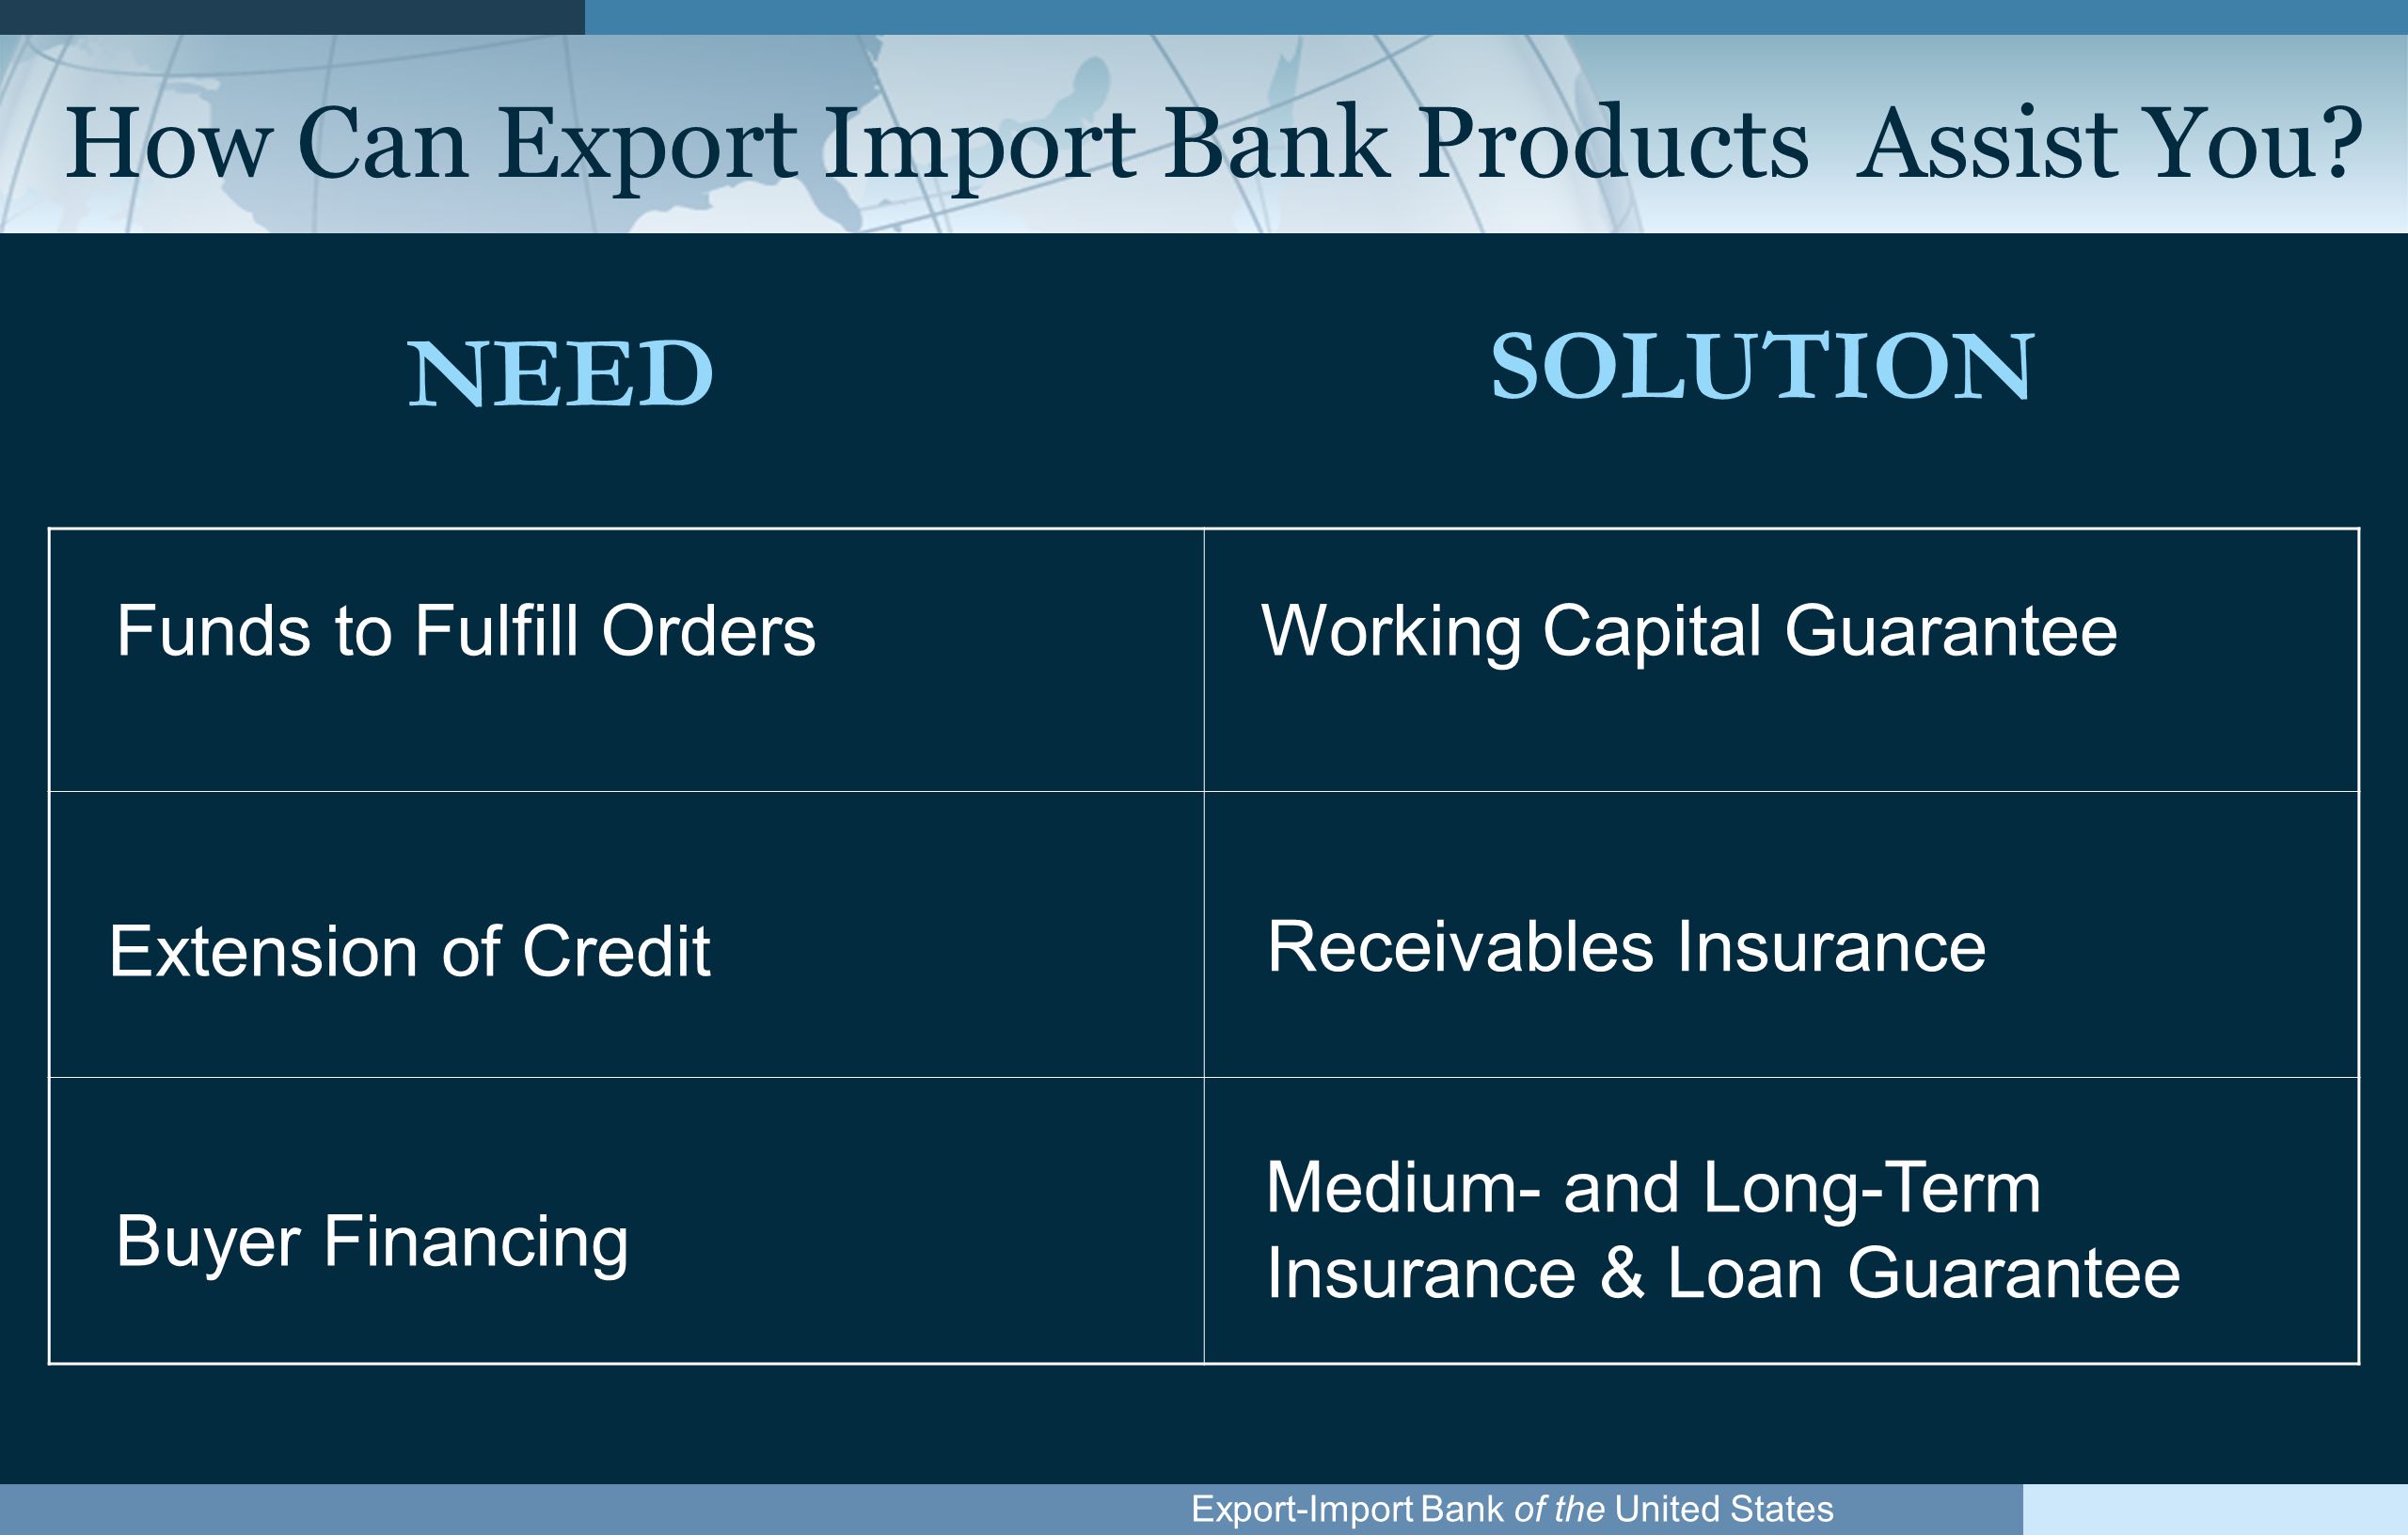 Export-Import Bank of the United States NEED SOLUTION Extension of Credit Working Capital GuaranteeFunds to Fulfill Orders Buyer Financing Medium- and Long-Term Insurance & Loan Guarantee Receivables Insurance How Can Export Import Bank Products Assist You